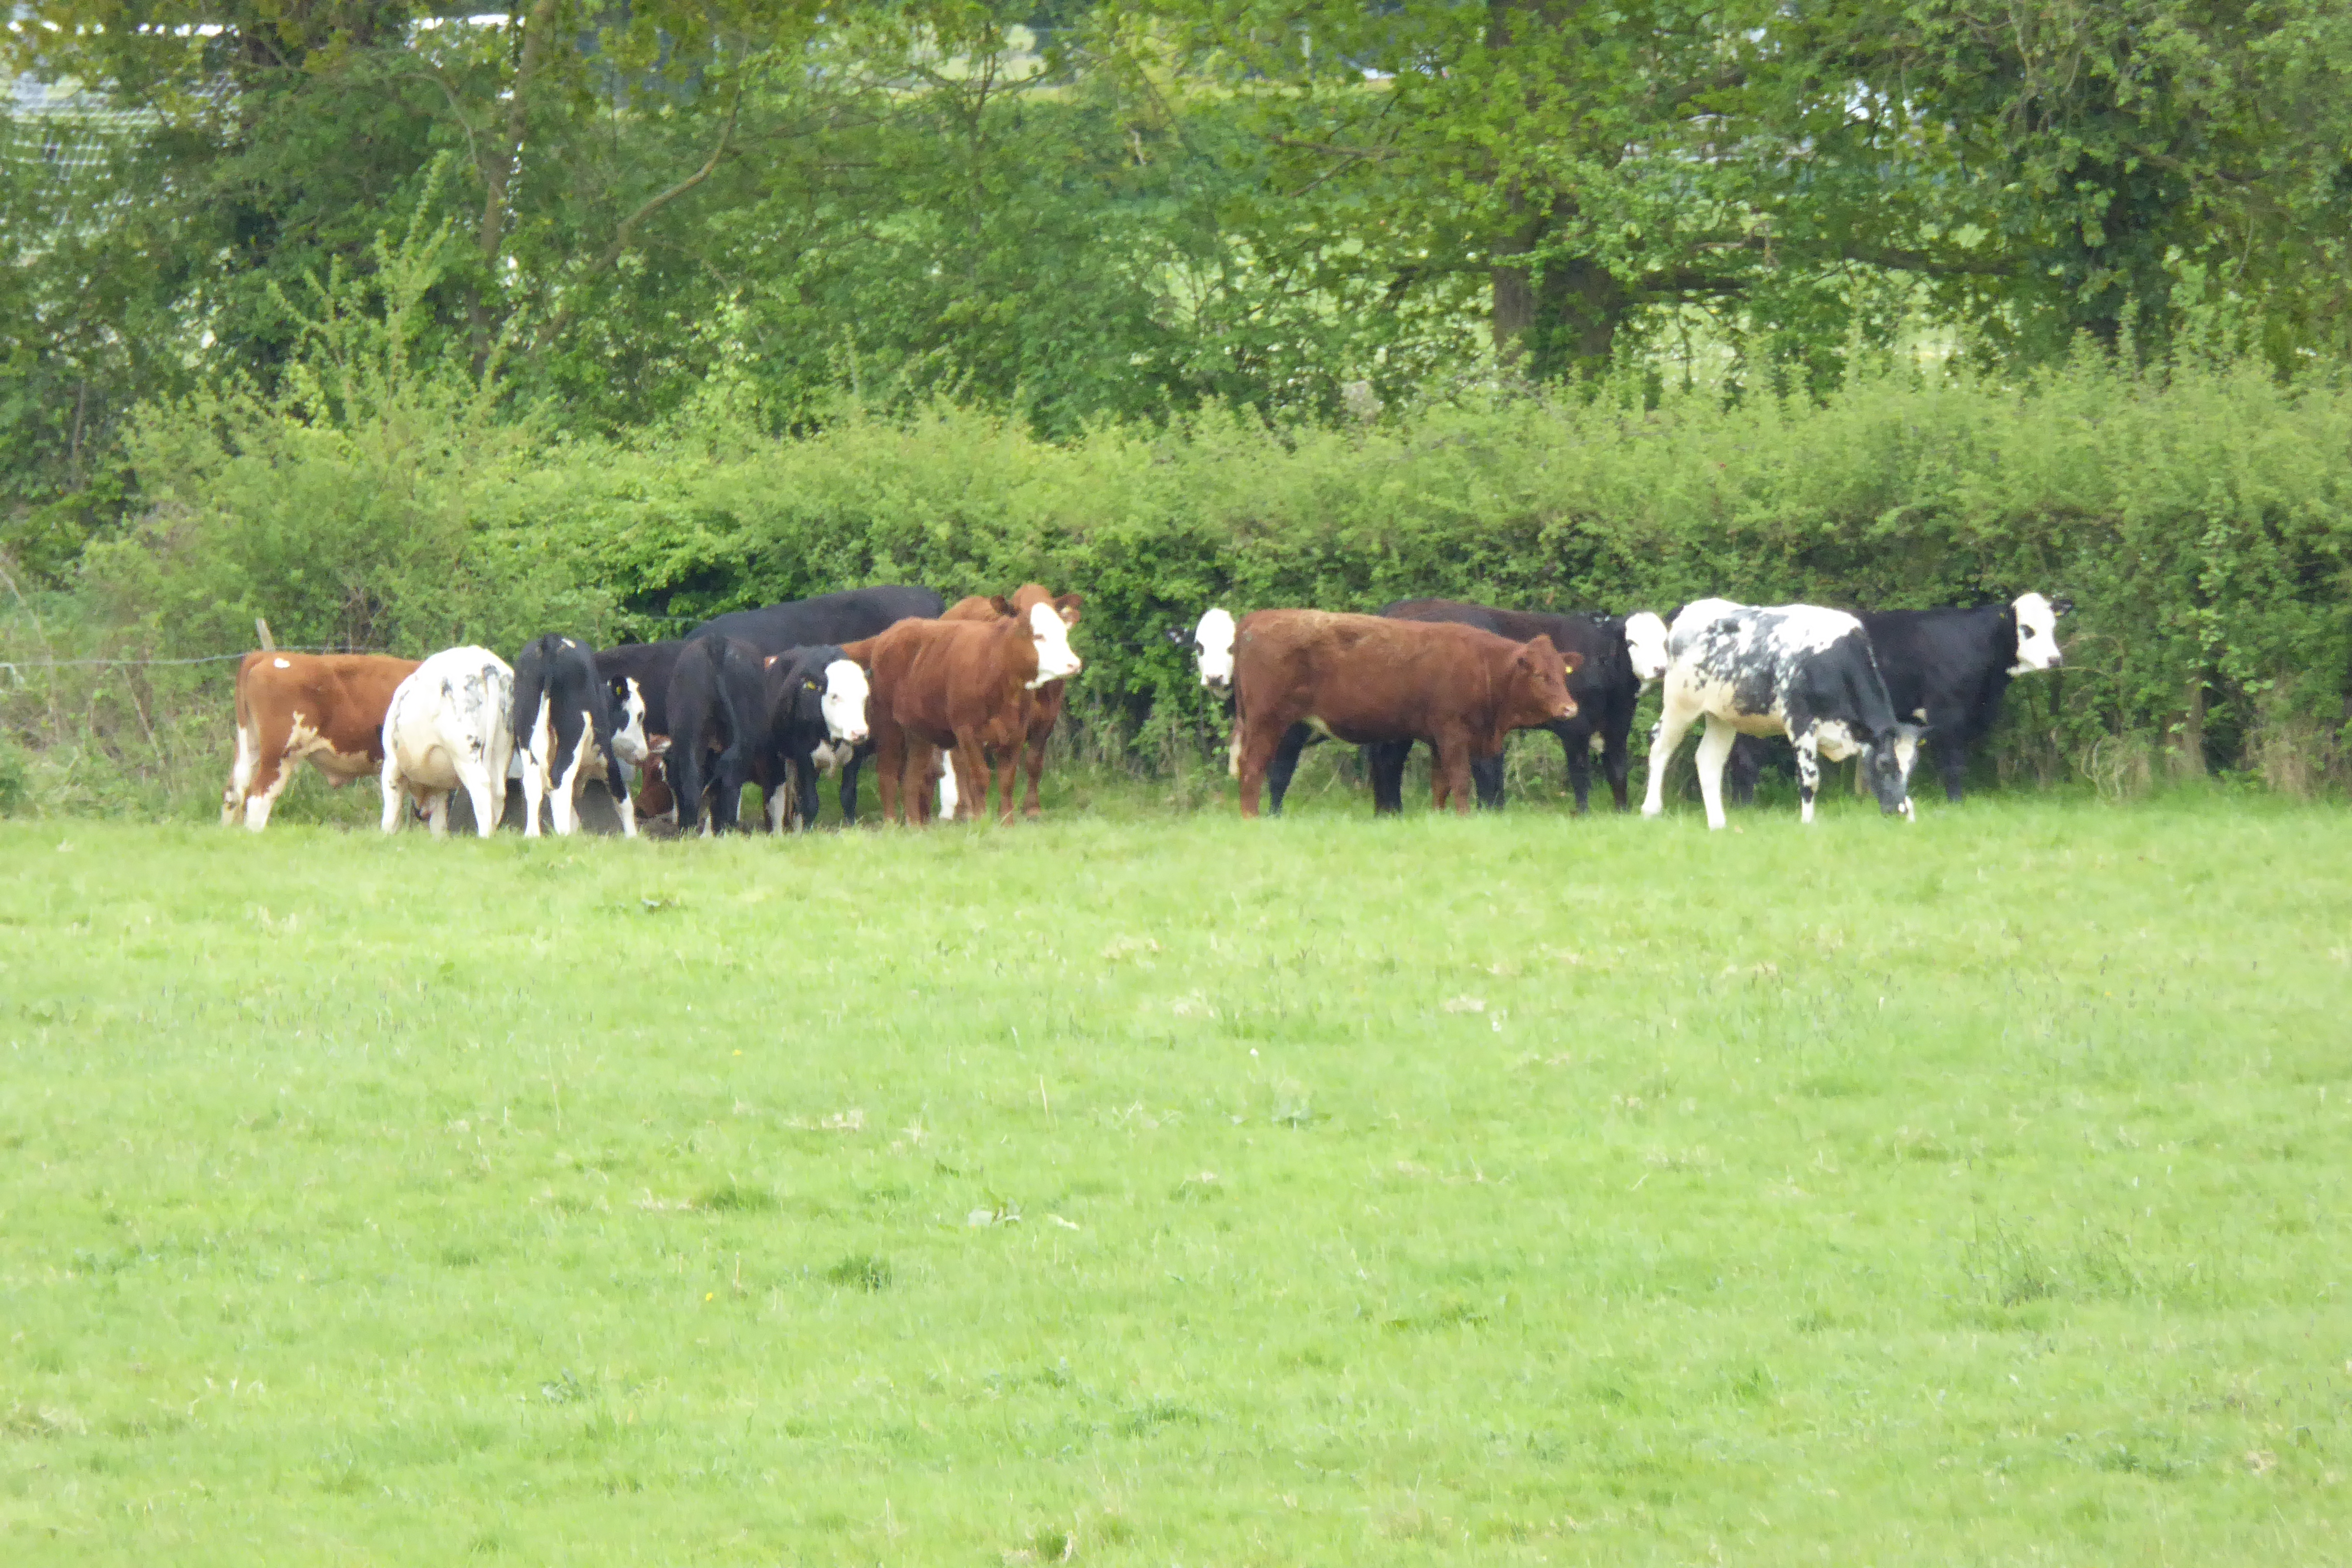 A sight that is unlikely to be seen again - cattle at Bell Farm in 2015.